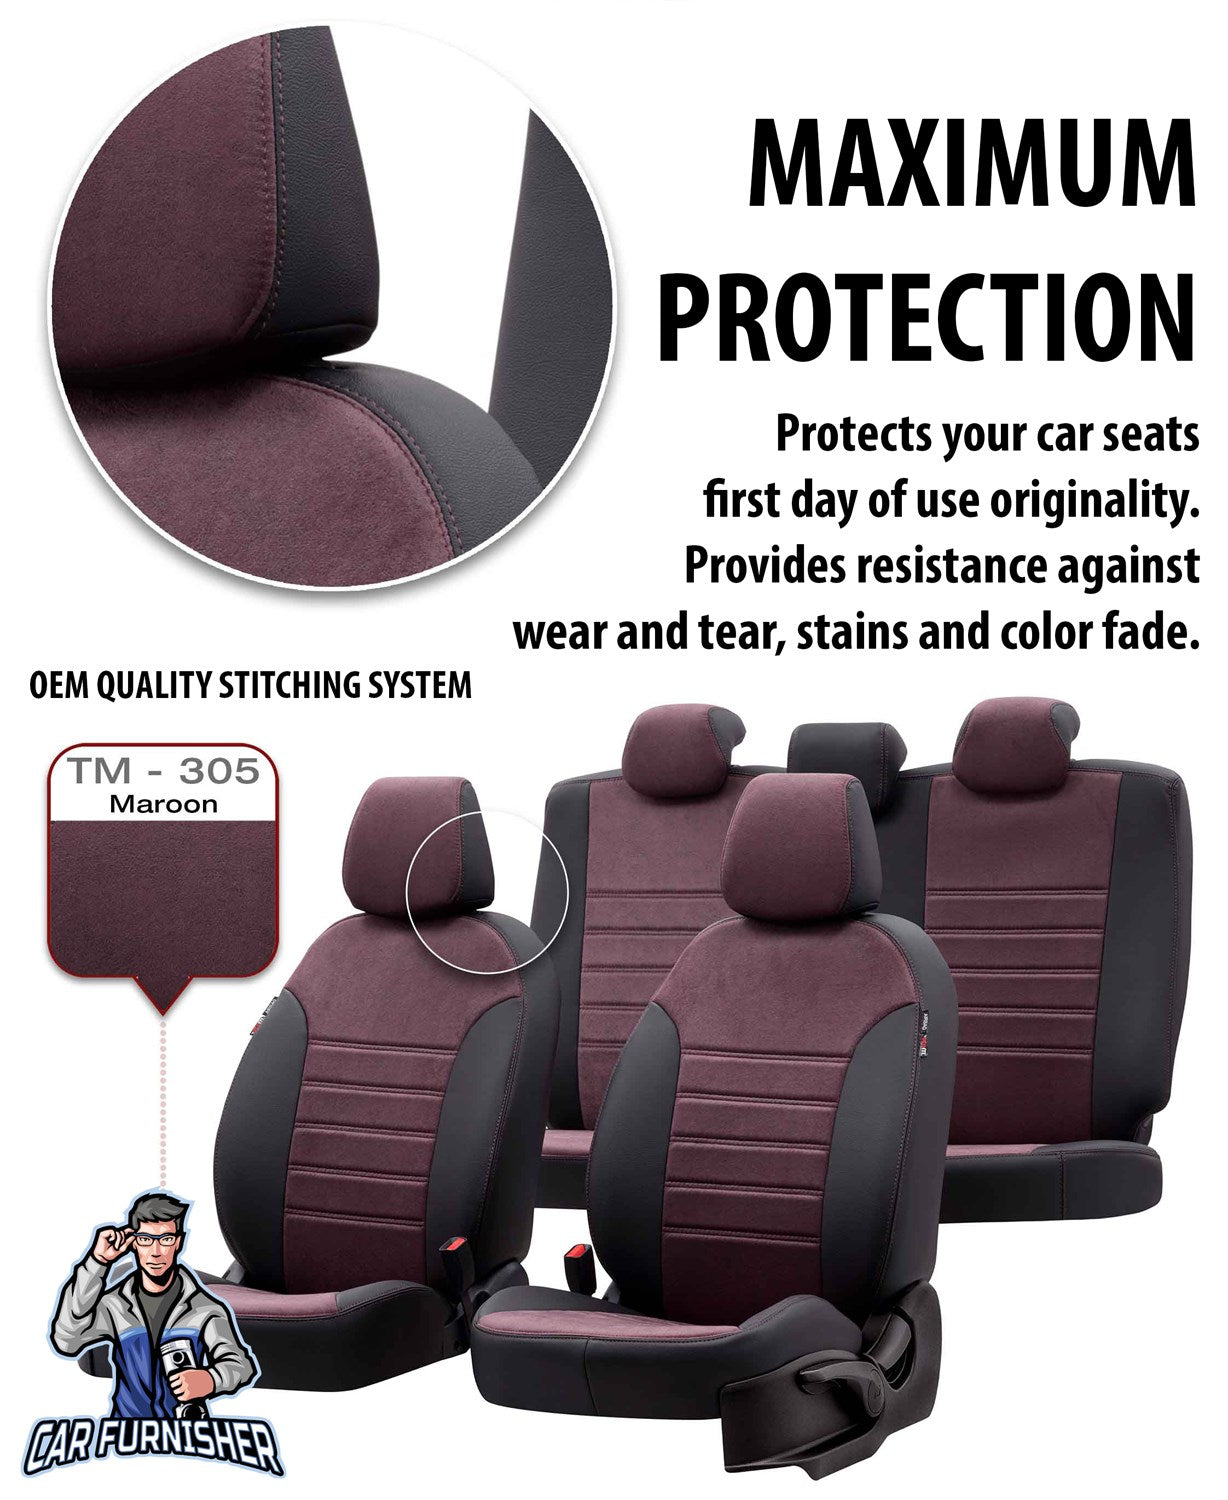 Citroen Jumper Seat Covers Milano Suede Design Burgundy Leather & Suede Fabric